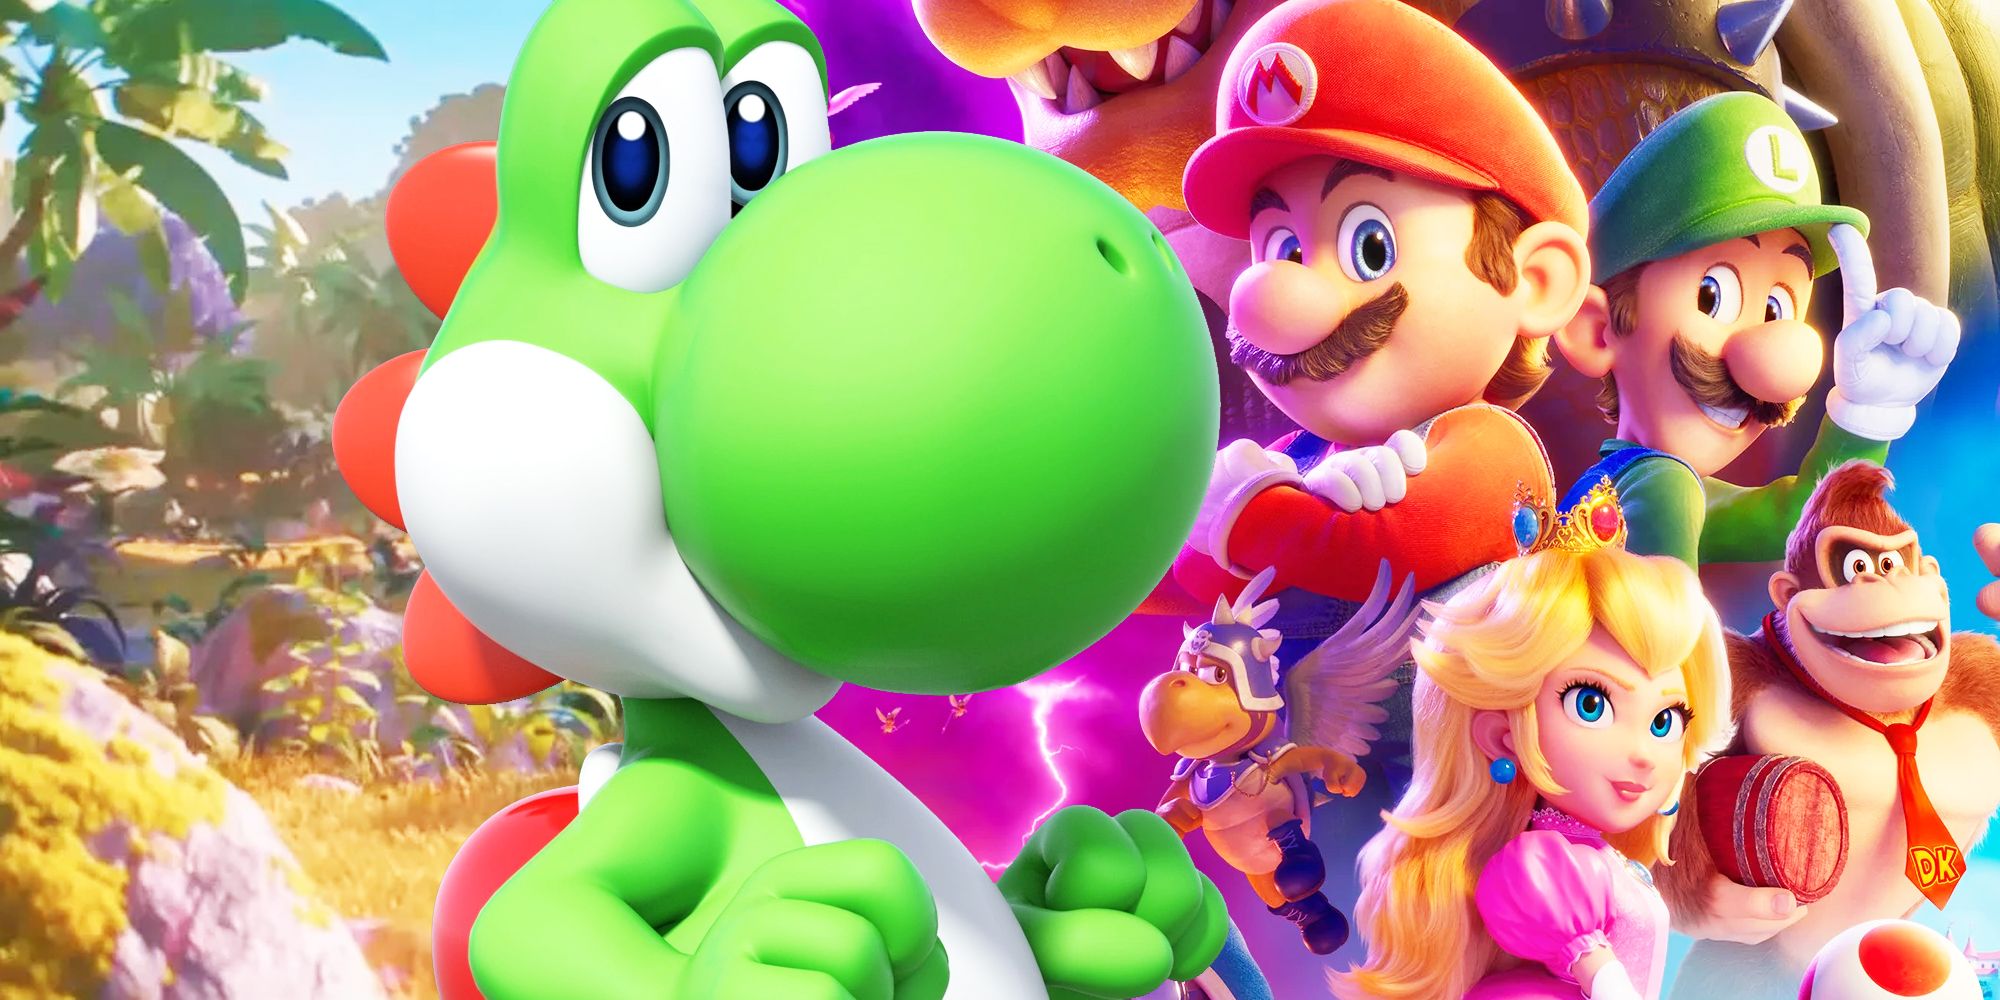 Yoshi and the Mario movie poster